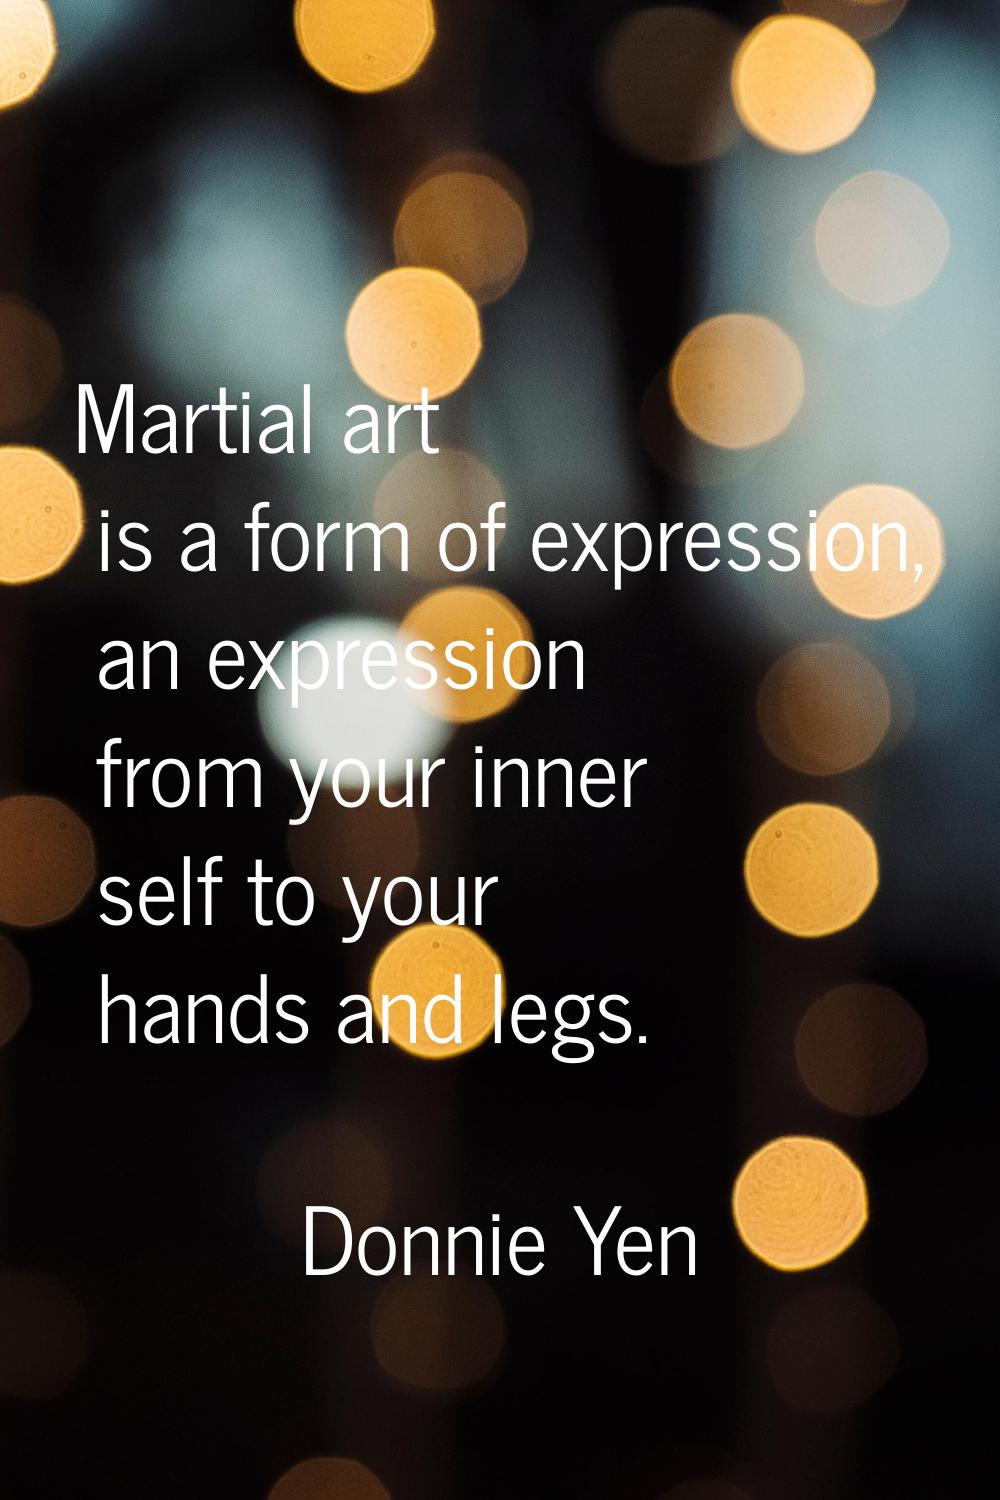 Martial art is a form of expression, an expression from your inner self to your hands and legs.